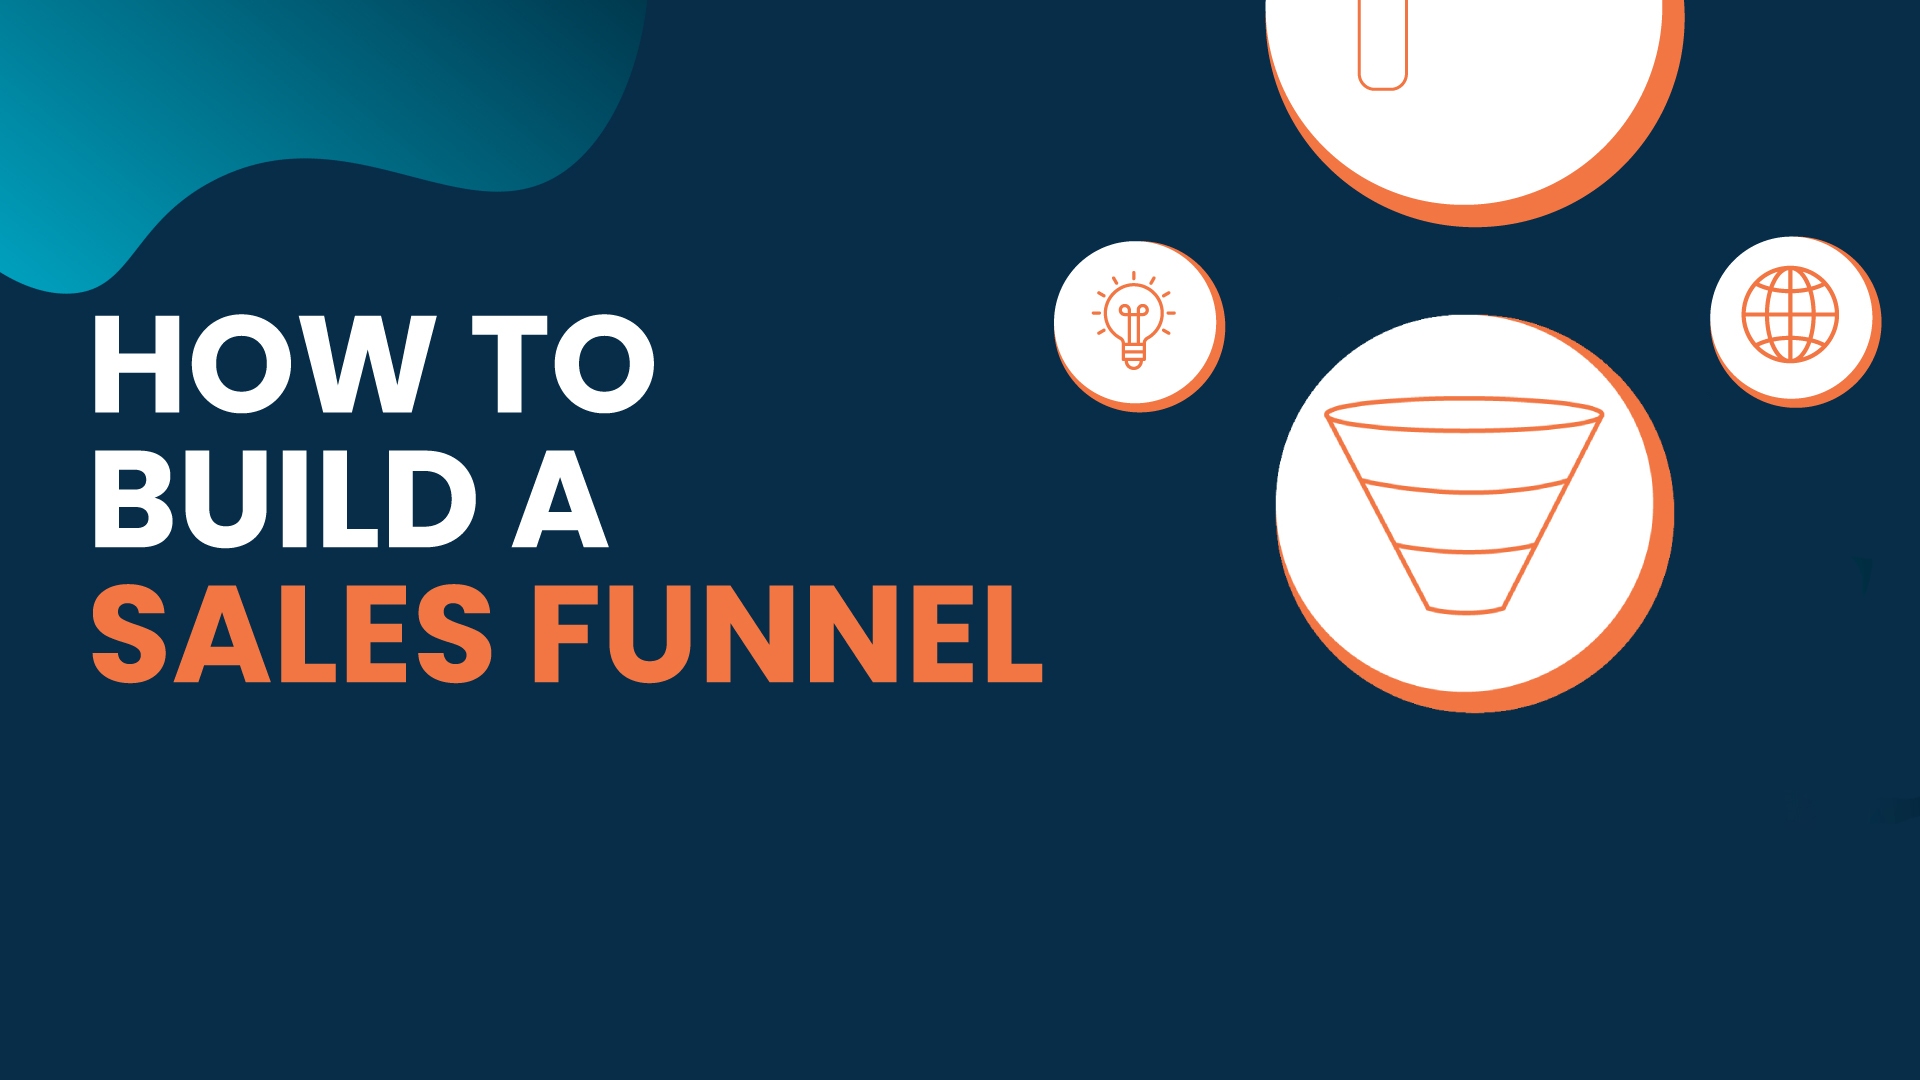 How To Build A Sales Funnel